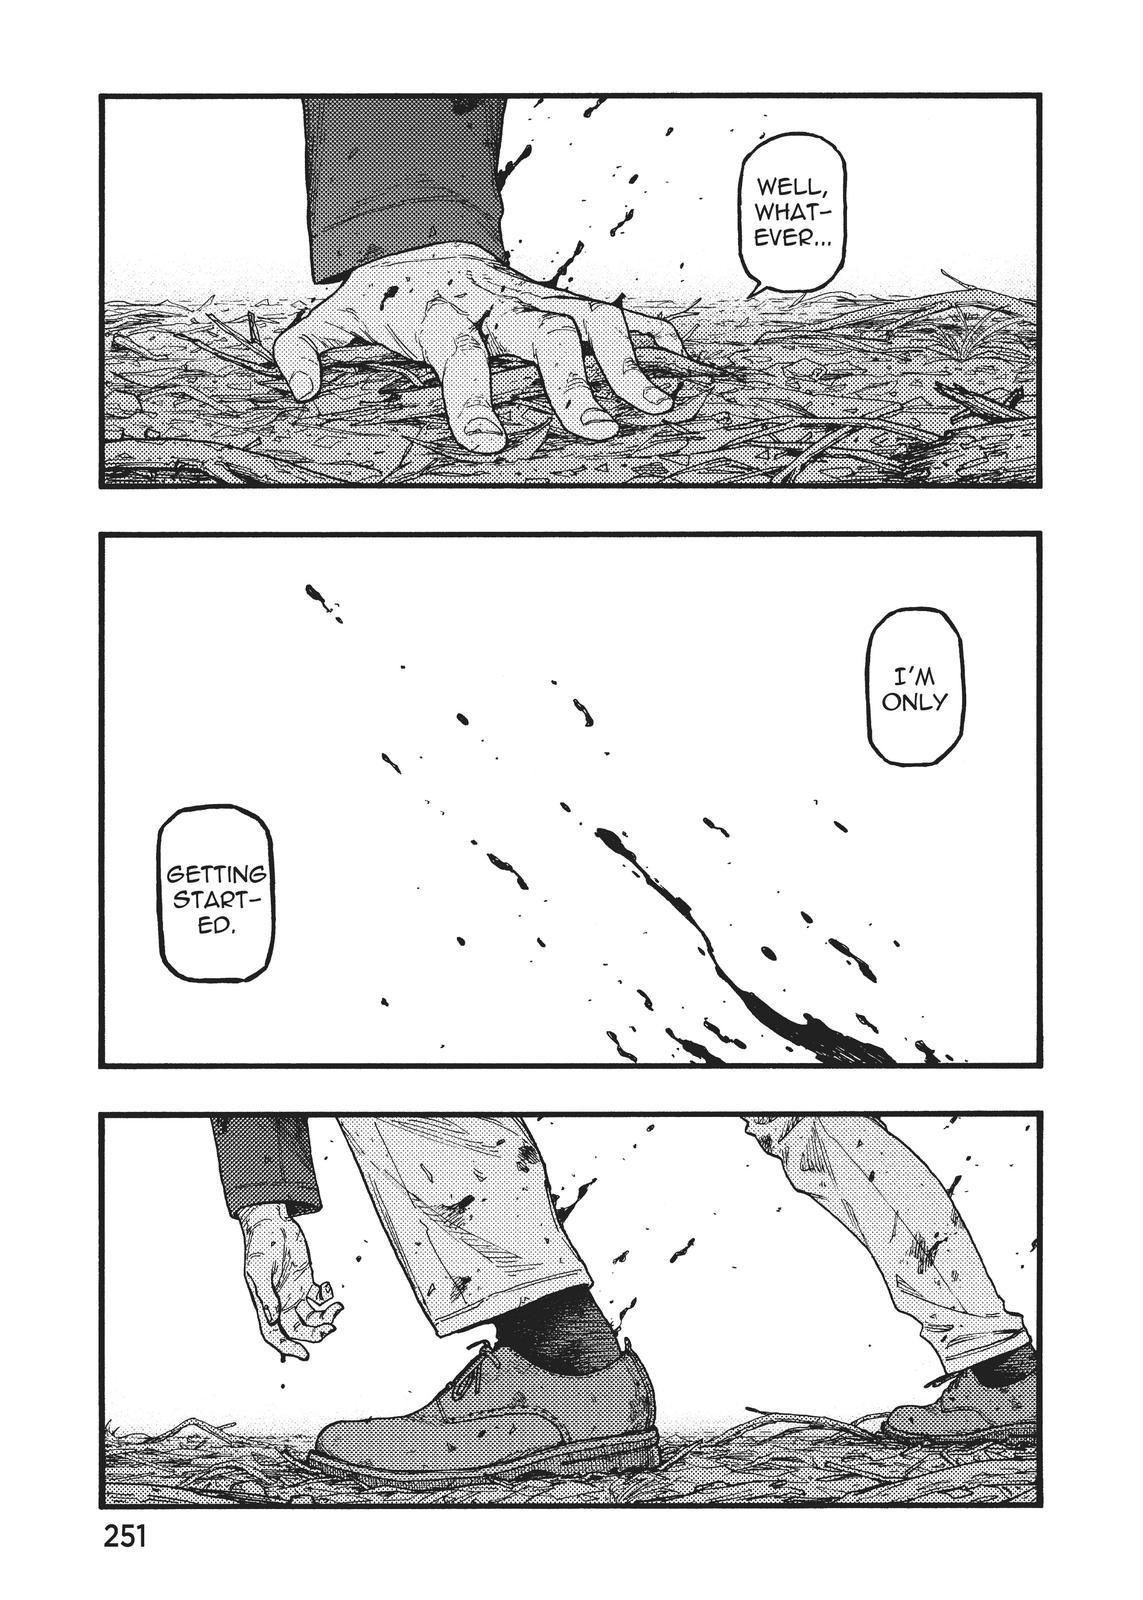 Ajin: demi human manga review Chapter 83 (At the End of the Journey) 